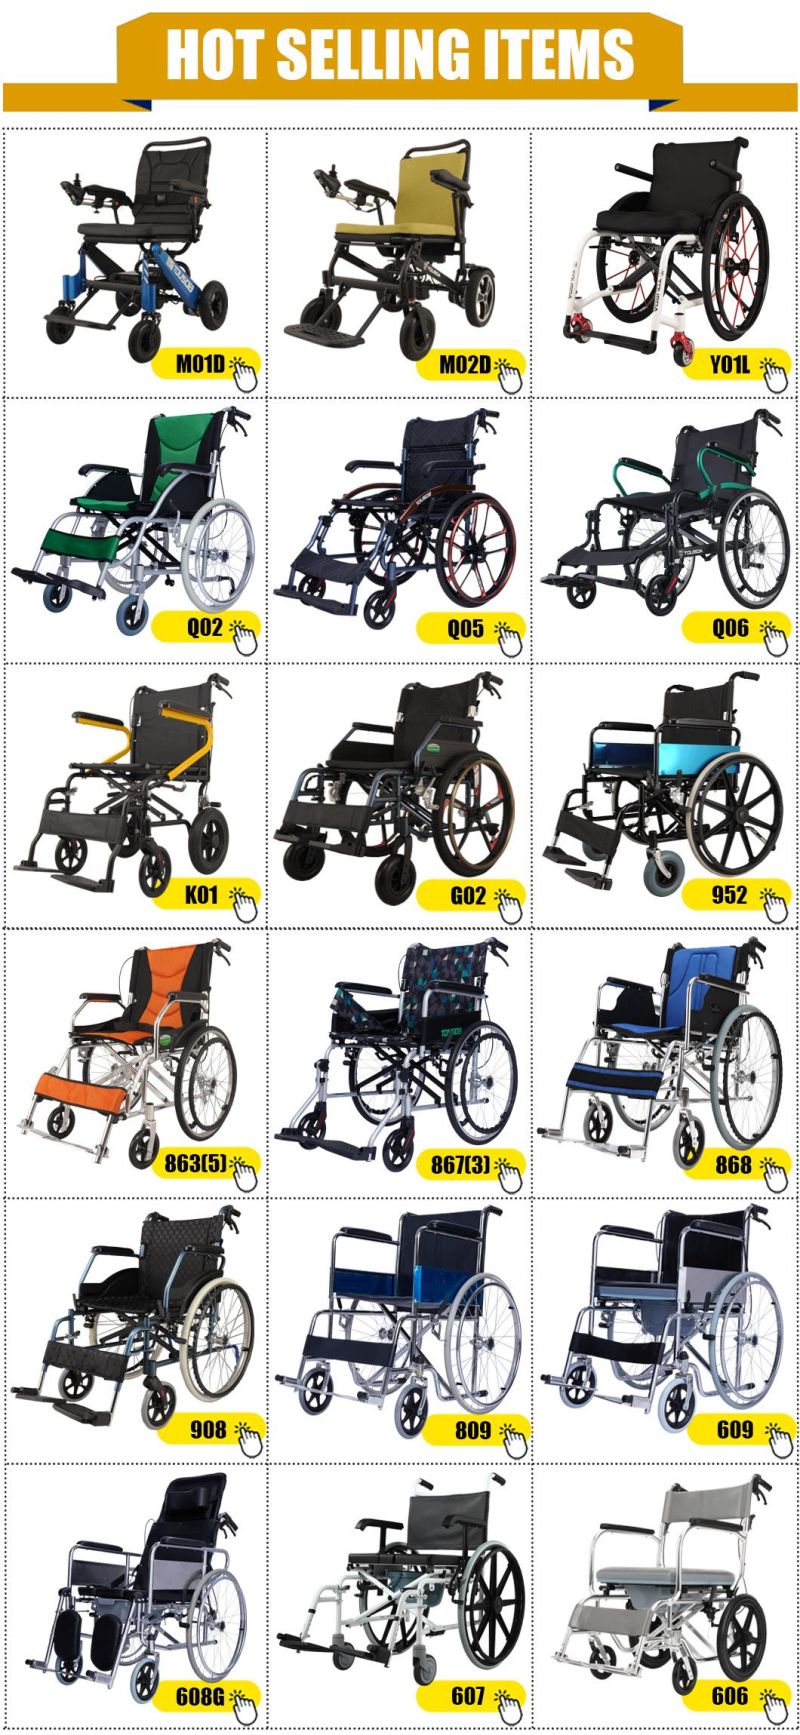 Silla De Ruedas Scooter Price Medical Aluminum Toilet Shower Commode Sport Folding Manual Power 180W Brushless Motor Wheelchair Handicapped Electric Wheelchair